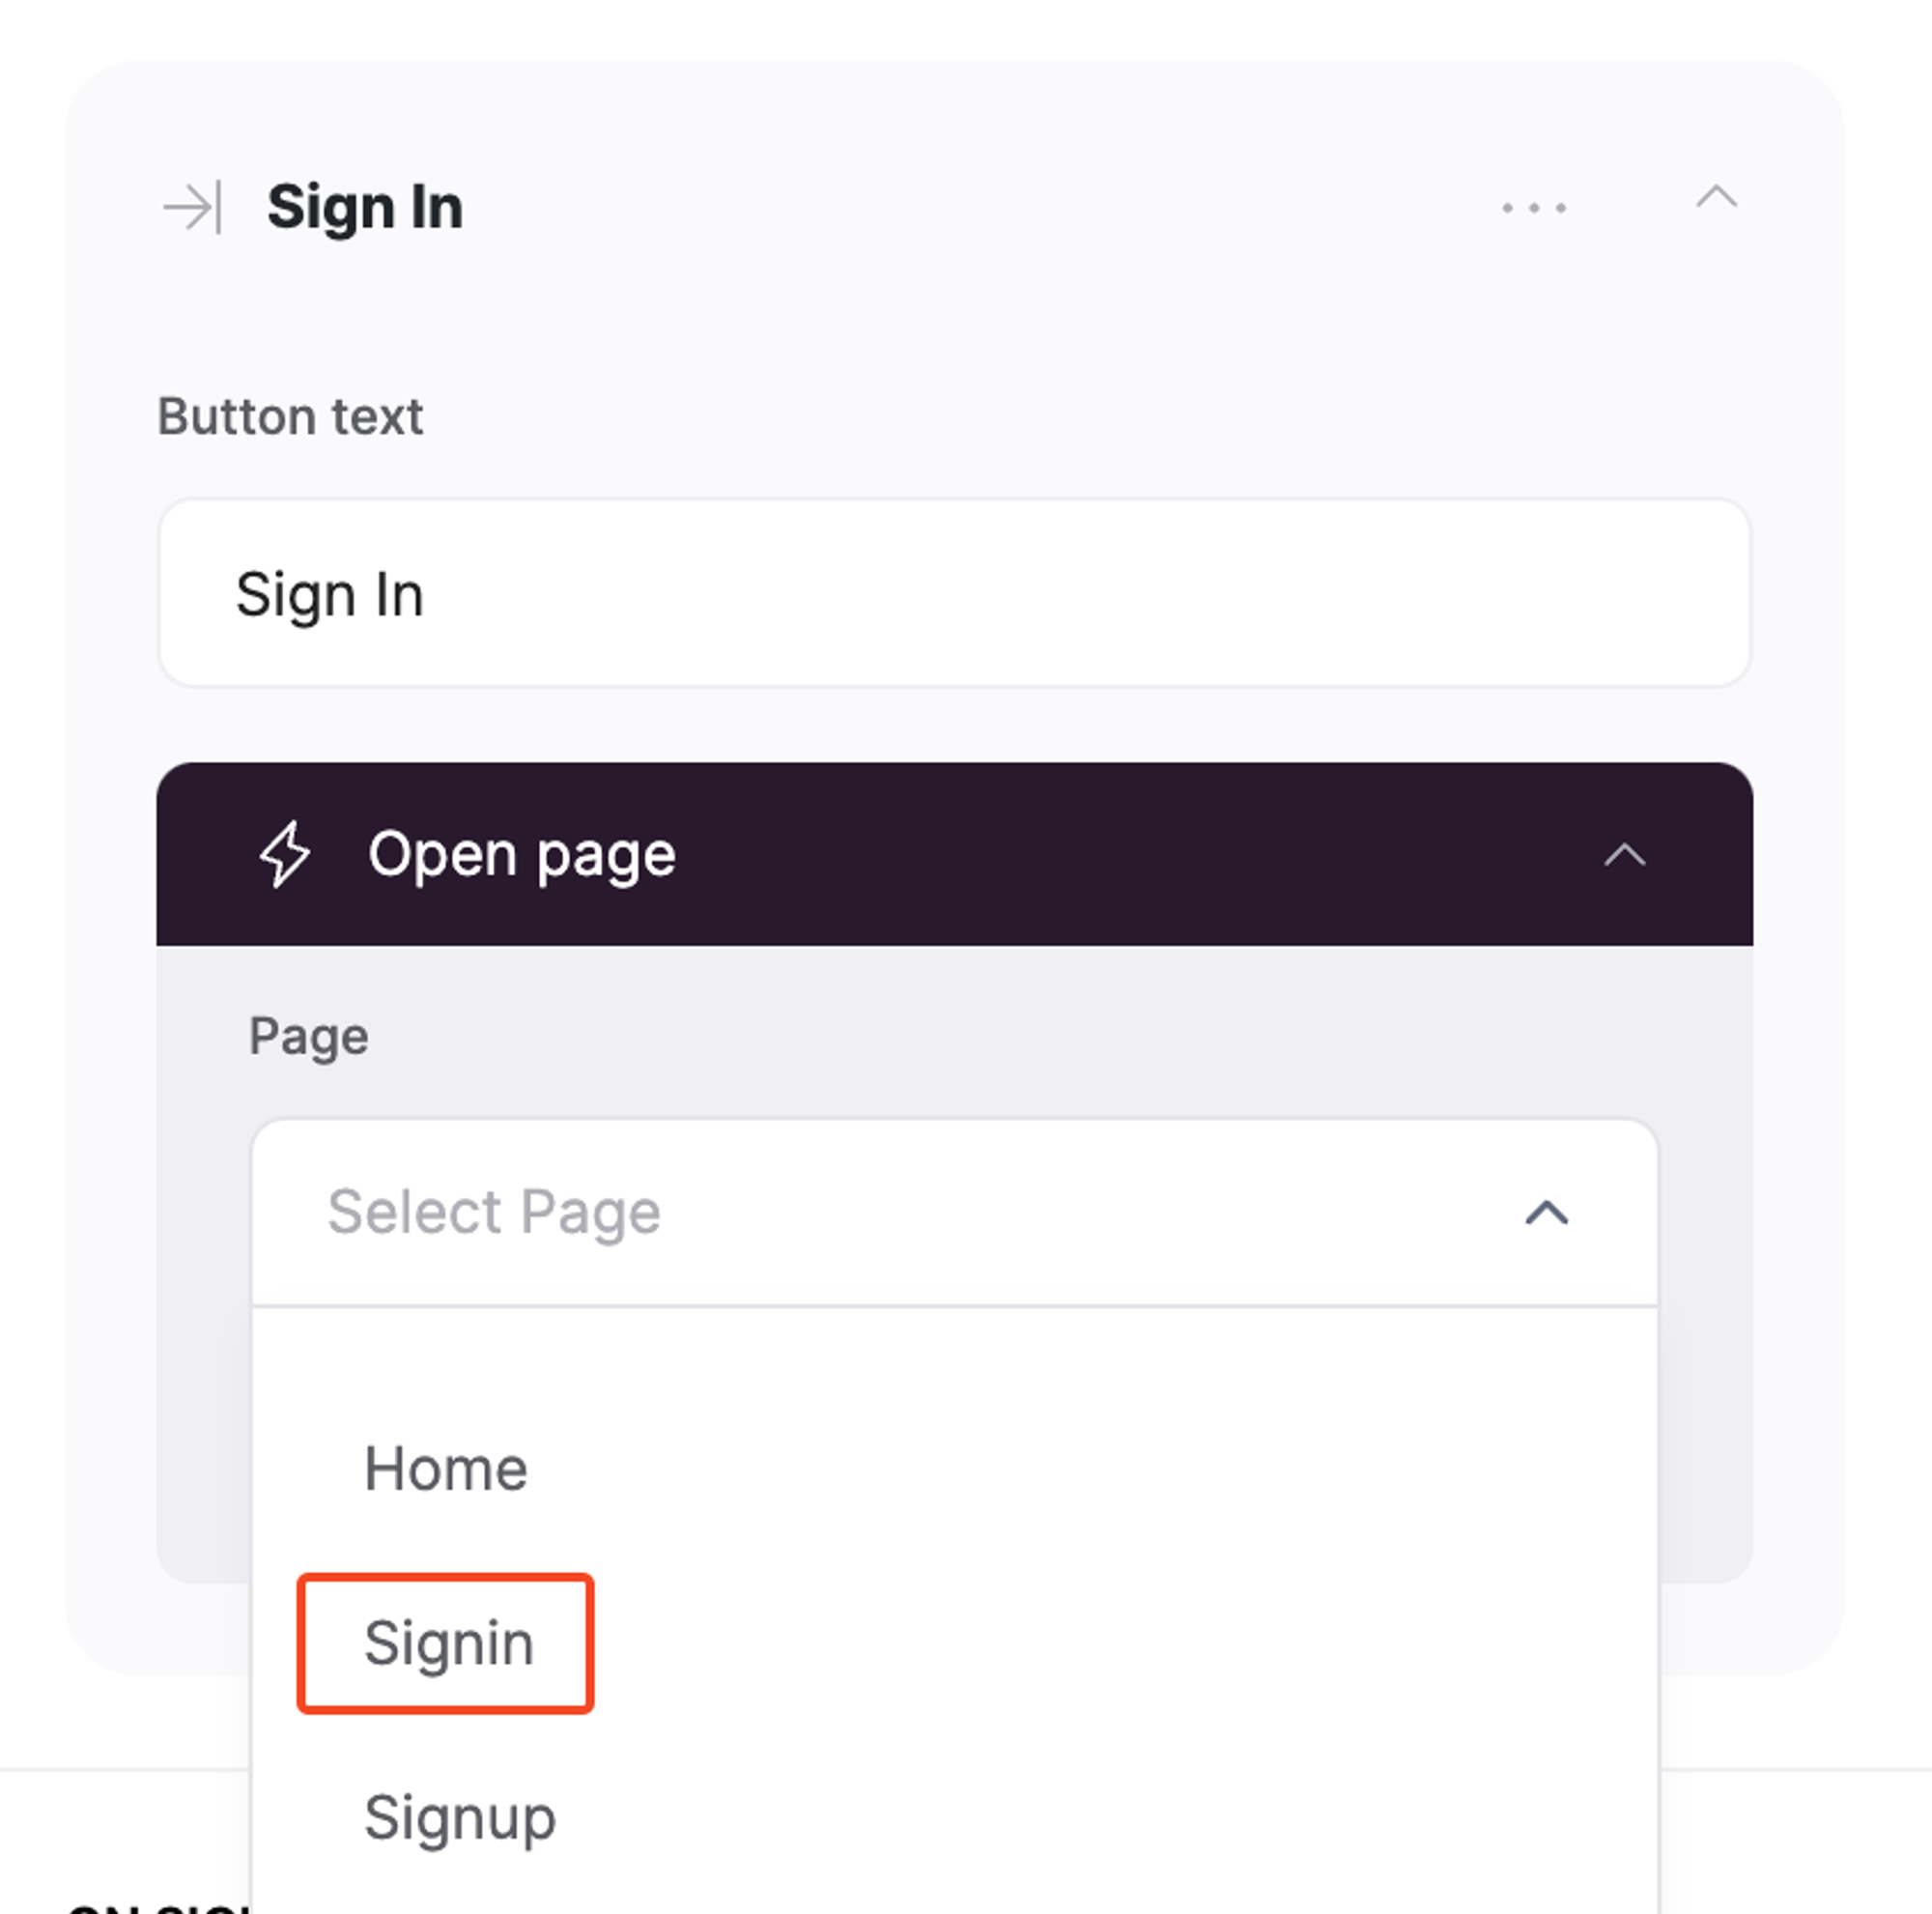 Linking Signin button to Signin page